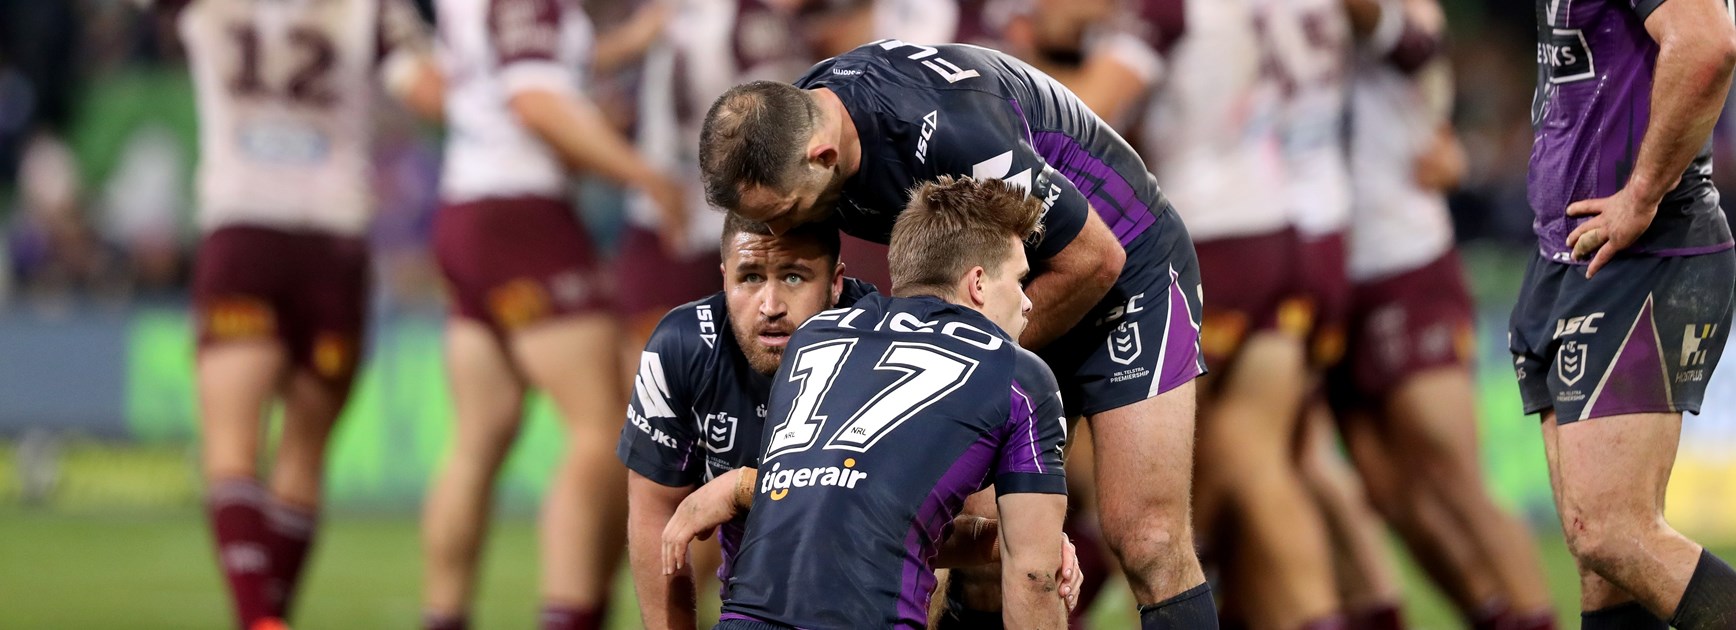 Cherry-Evans field goal hands Manly epic win over Storm